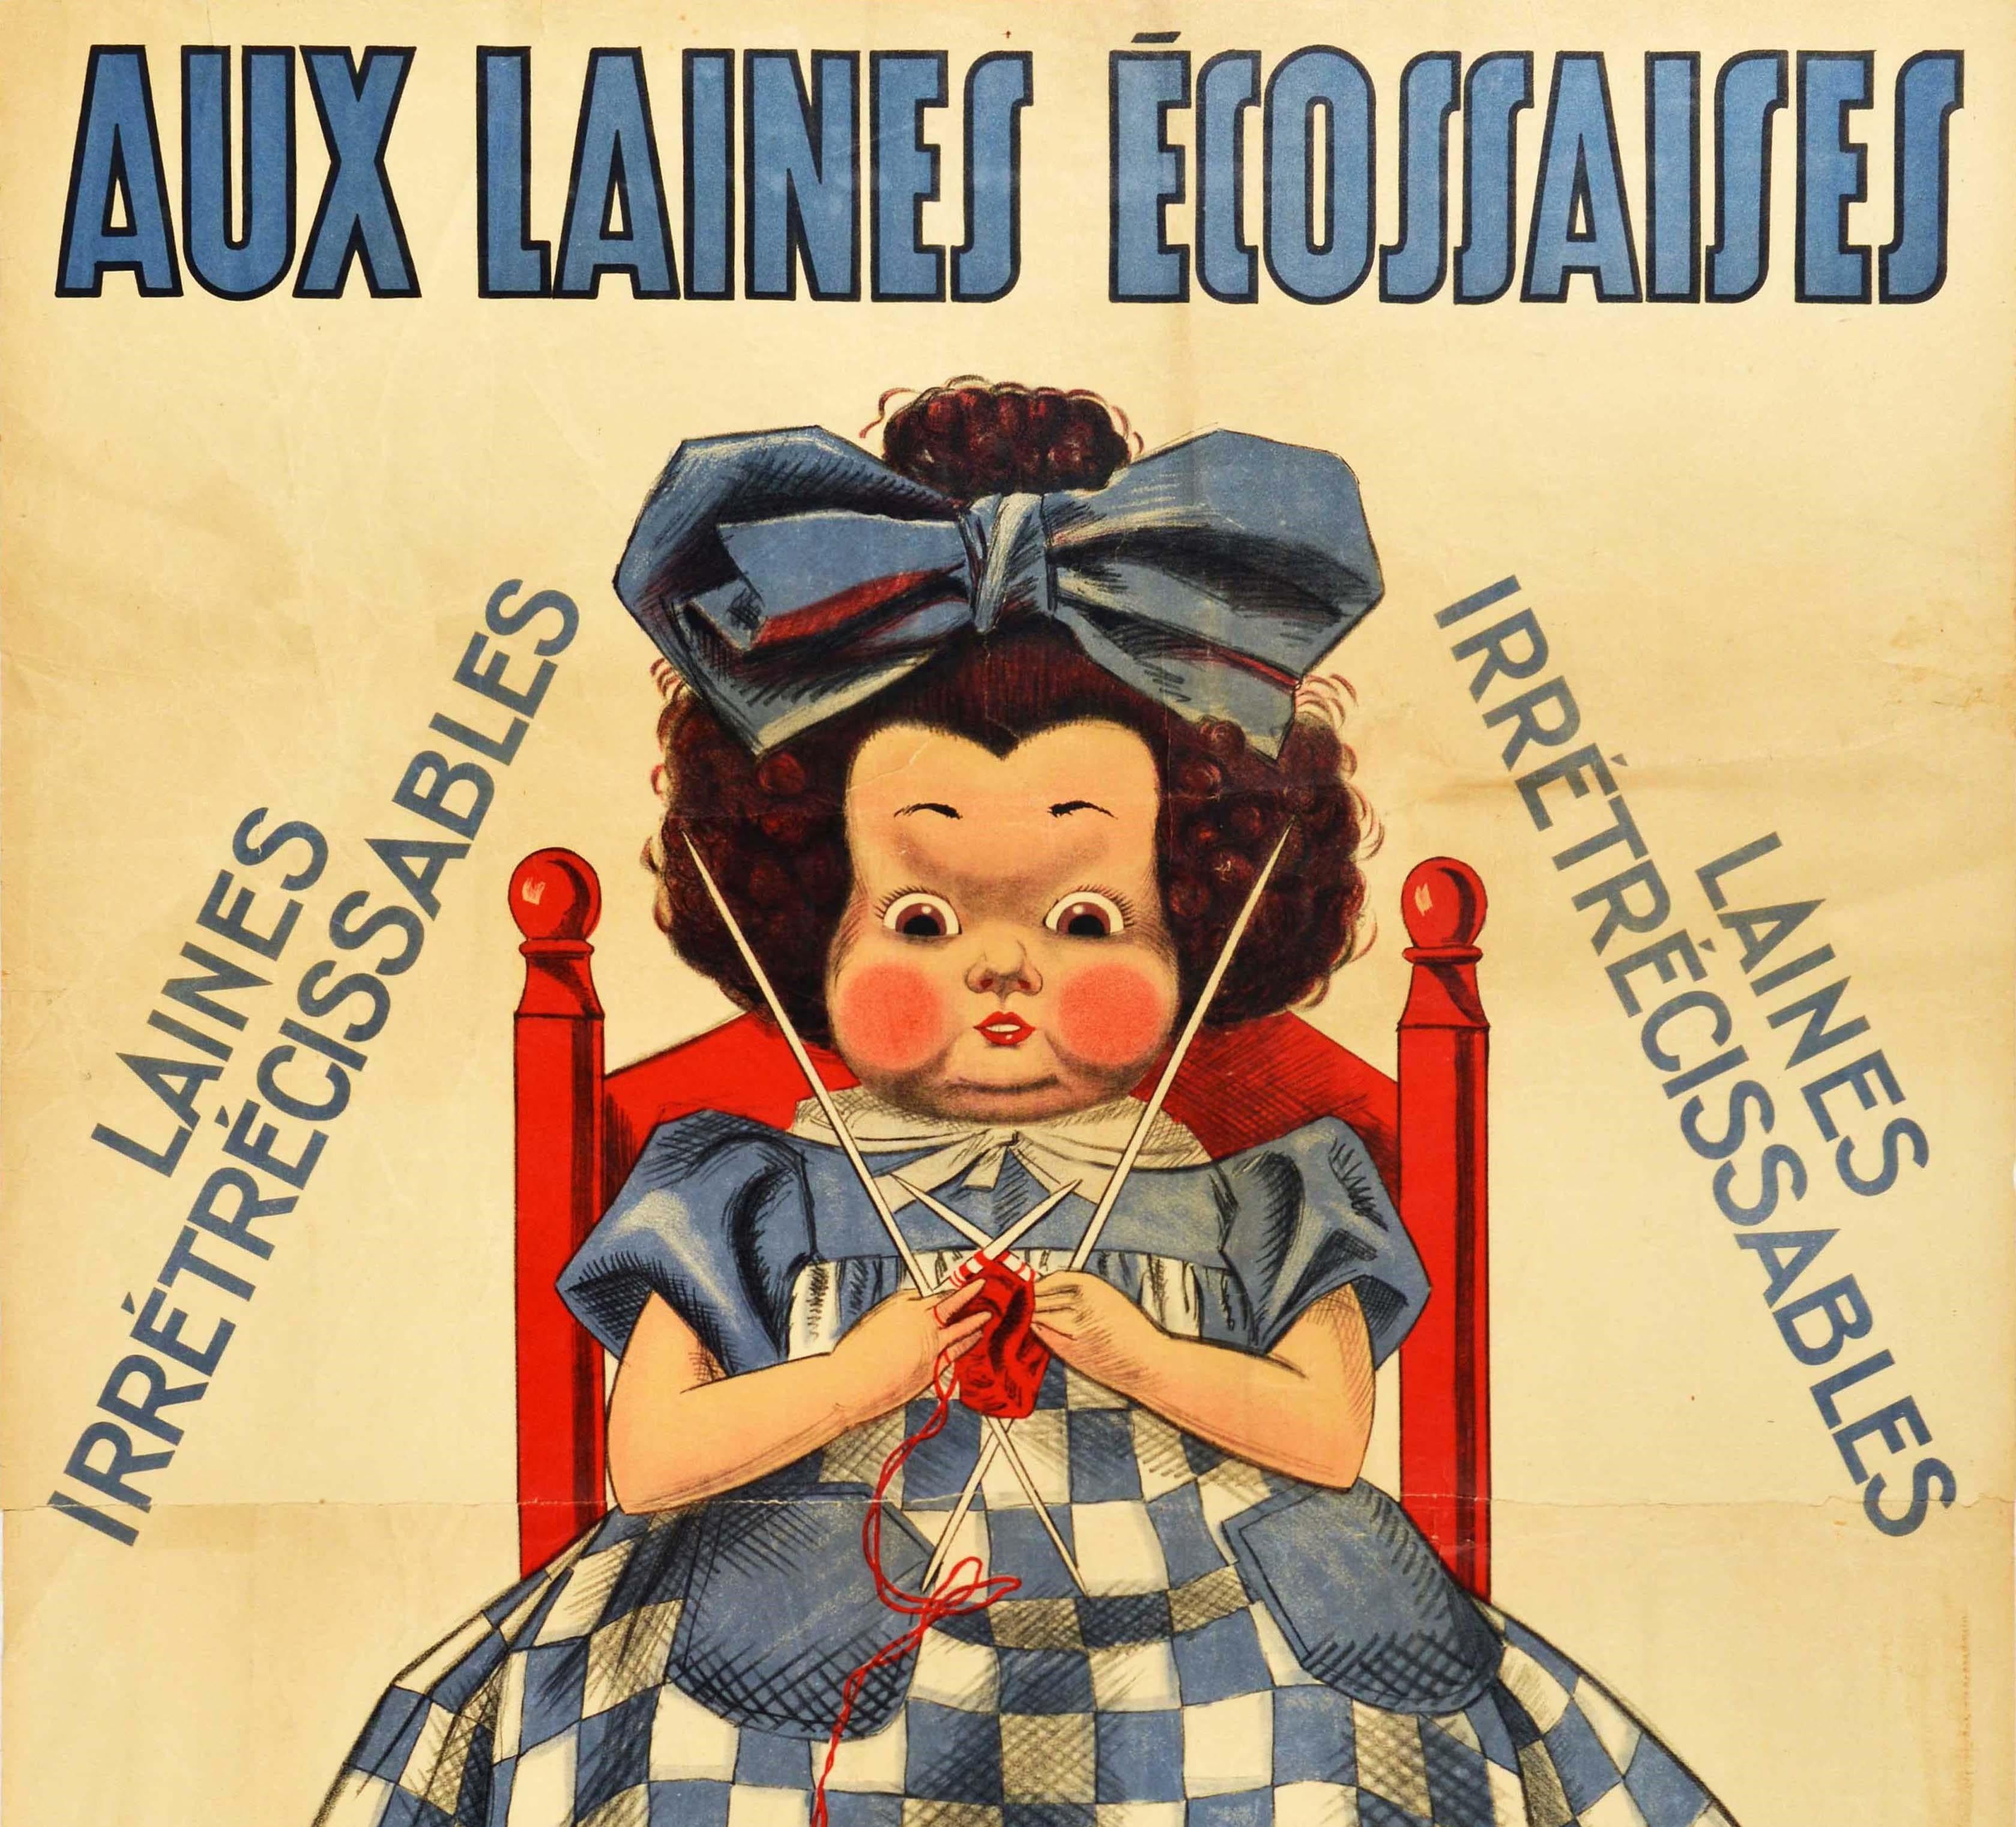 Original vintage advertising poster - With Scottish Yarns Shrink-Resistant Yarn Ask for our Wool at M. Rolley / Aux Laines Ecossaises Laines Irretrecissable Demandez nos Laines chez M. Rolley 36 Quai Tostain a Trouville sur Mer - featuring an image